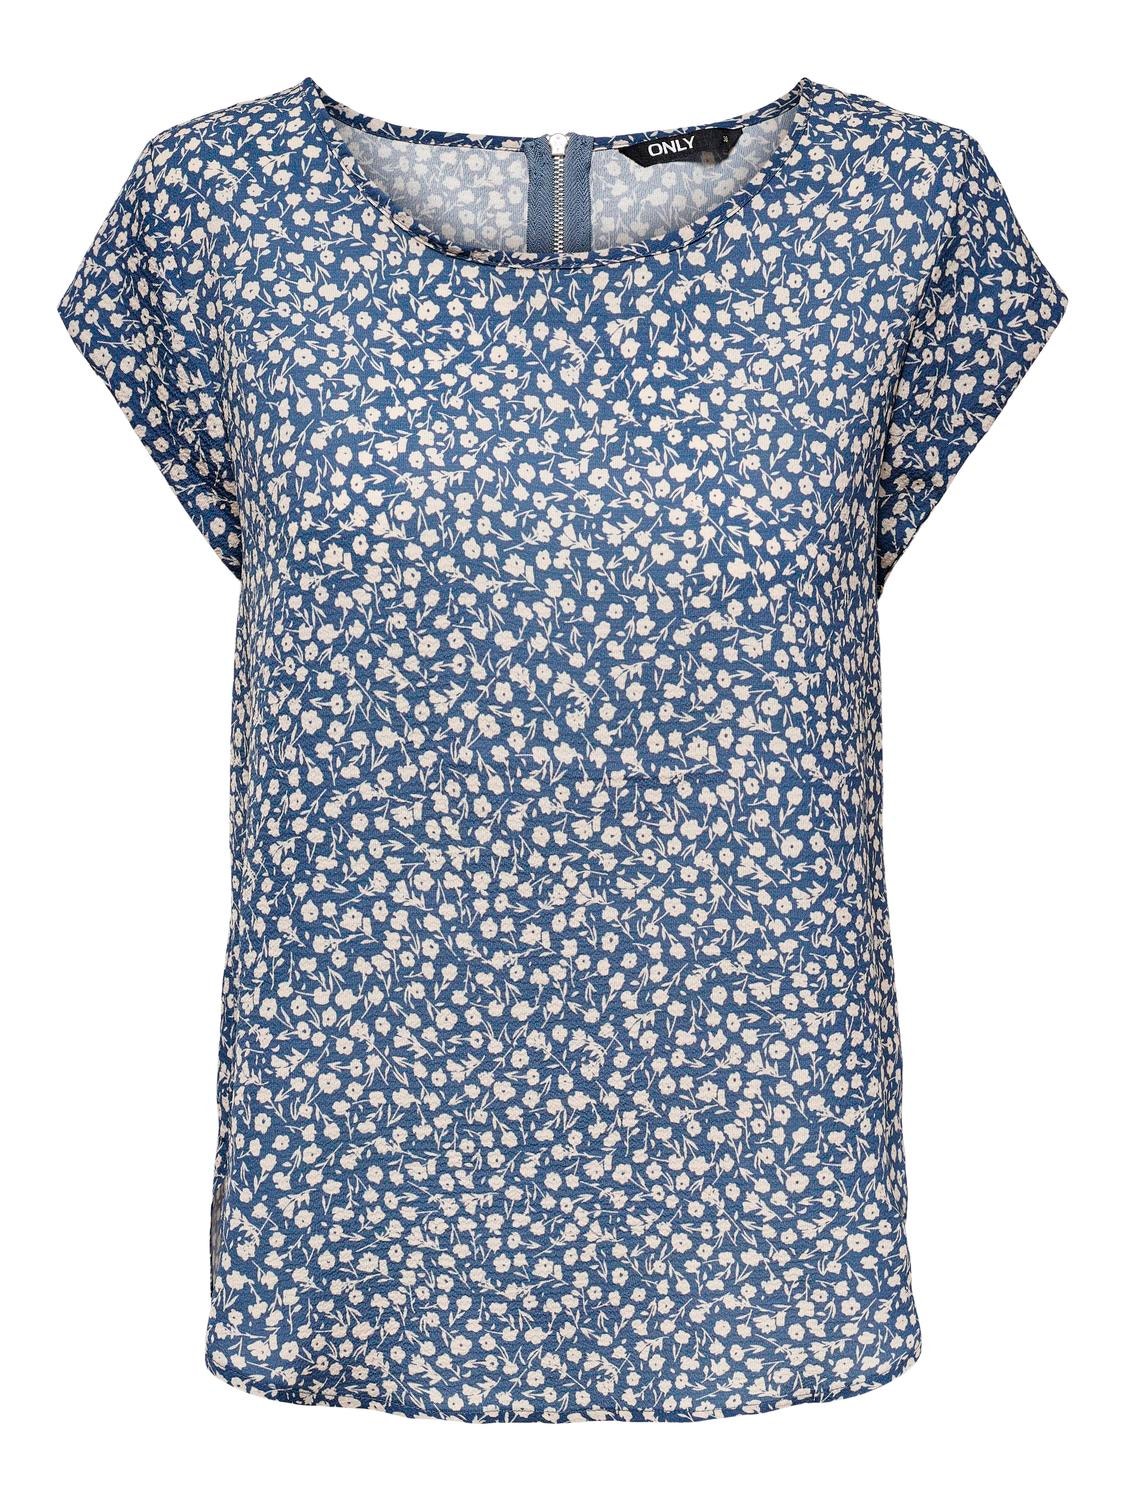 ONLY Printed Short Sleeved Top -Blue Mirage - 15161116